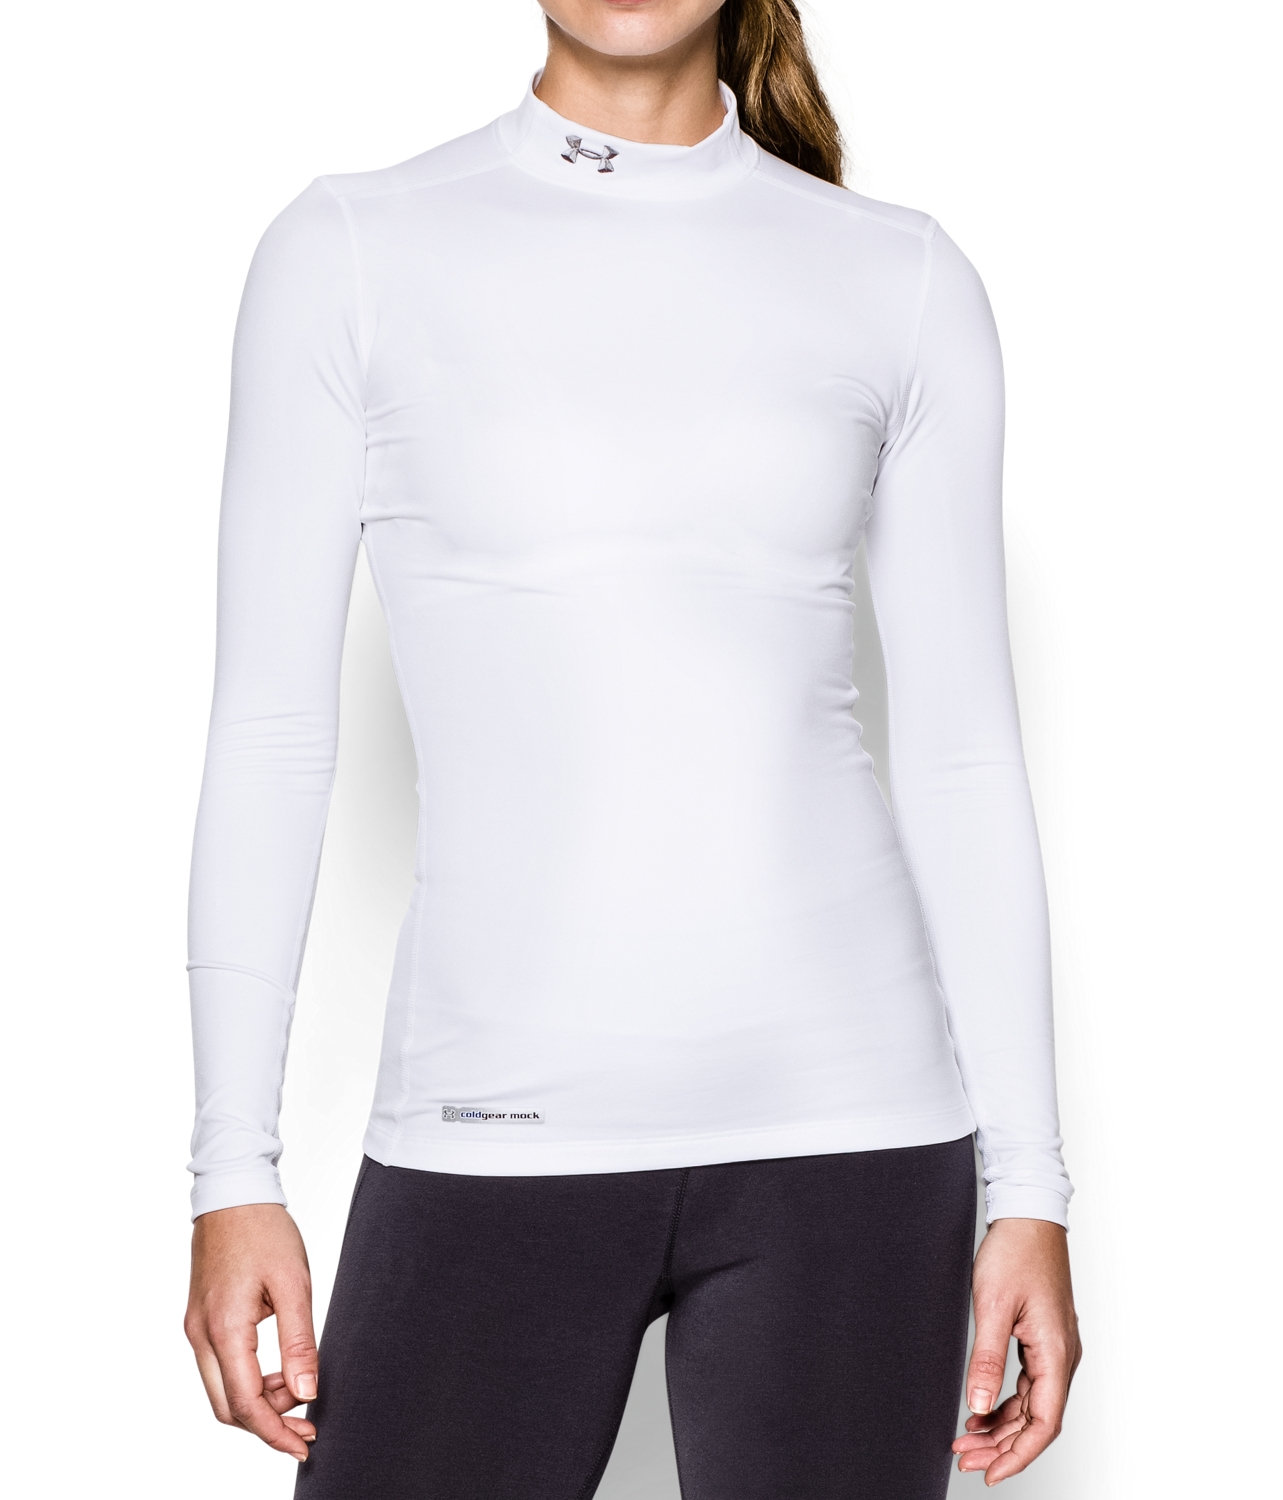 1215968 Under Armour Women's ColdGear Fitted Long Sleeve Mock Shirt FREE SHIP 